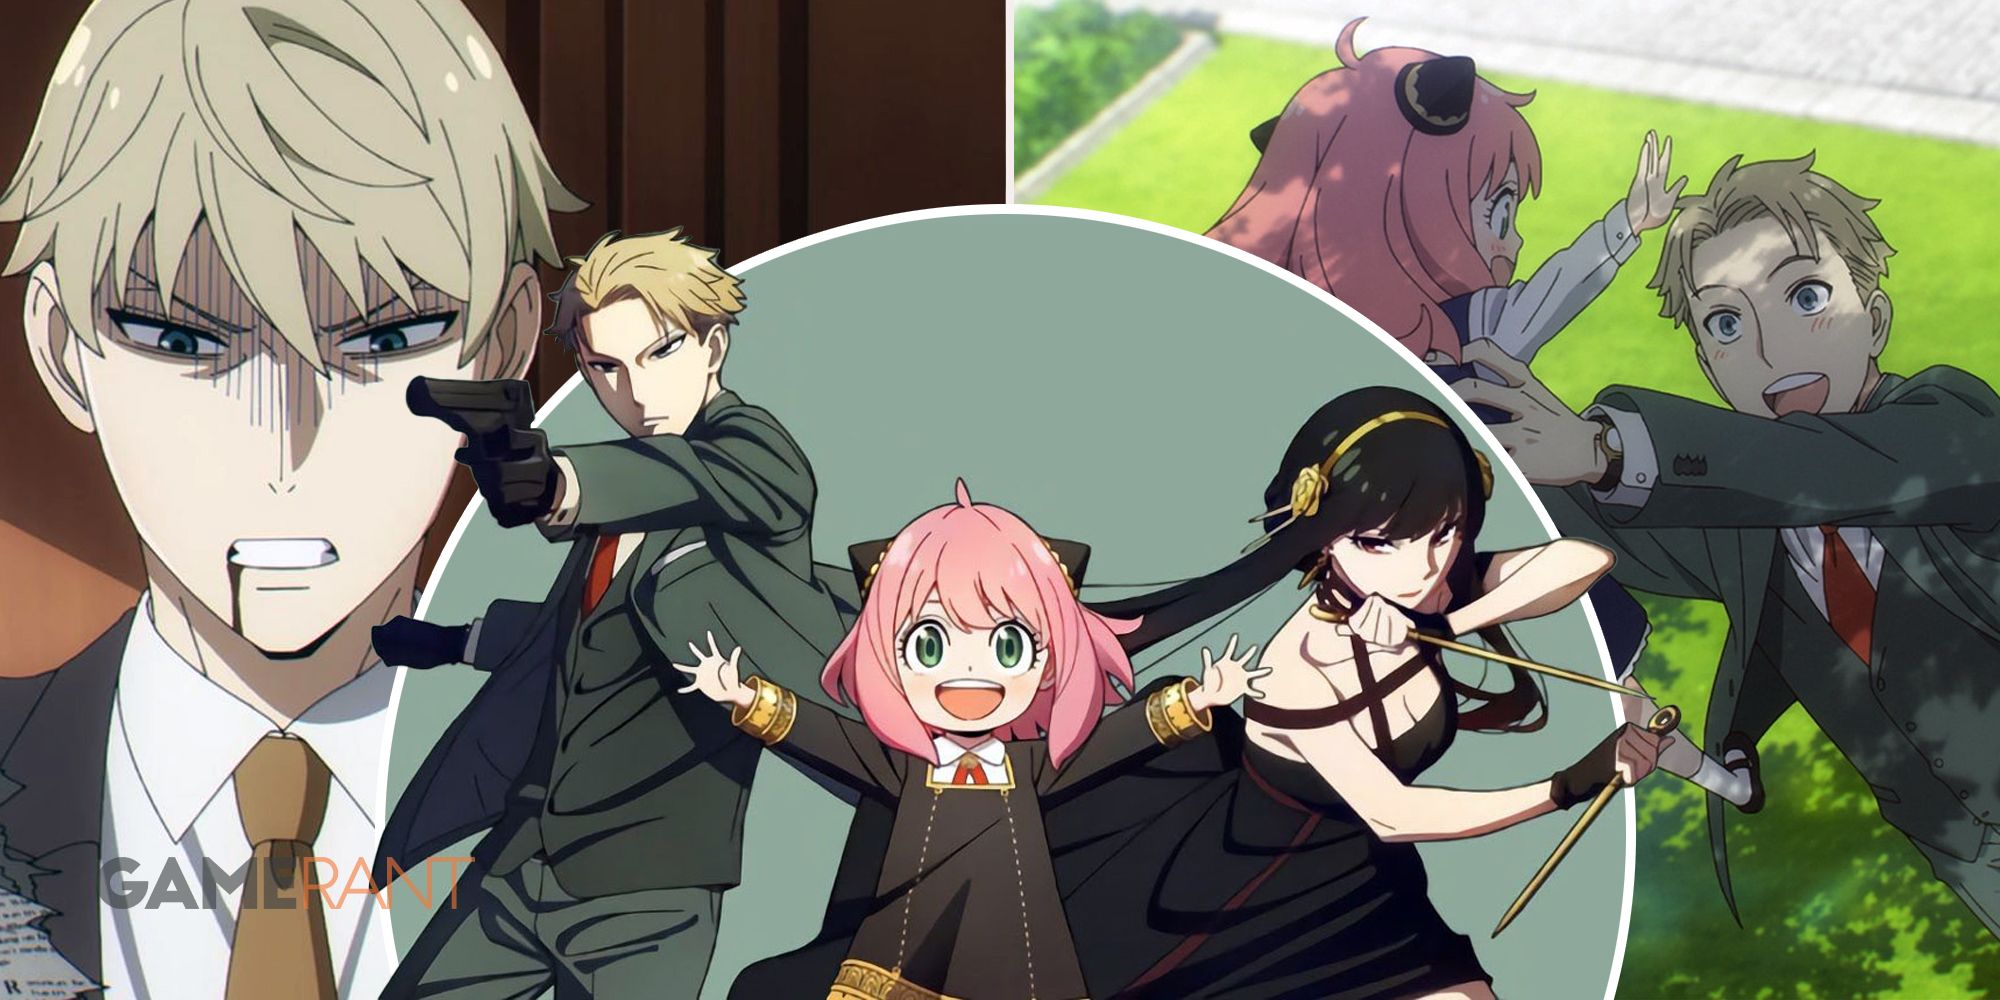 Spy x Family Loid Forger with blood on his mouth on left, Loid, Anya, and Yor in middle, Loid holding Anya in the air smiling on right